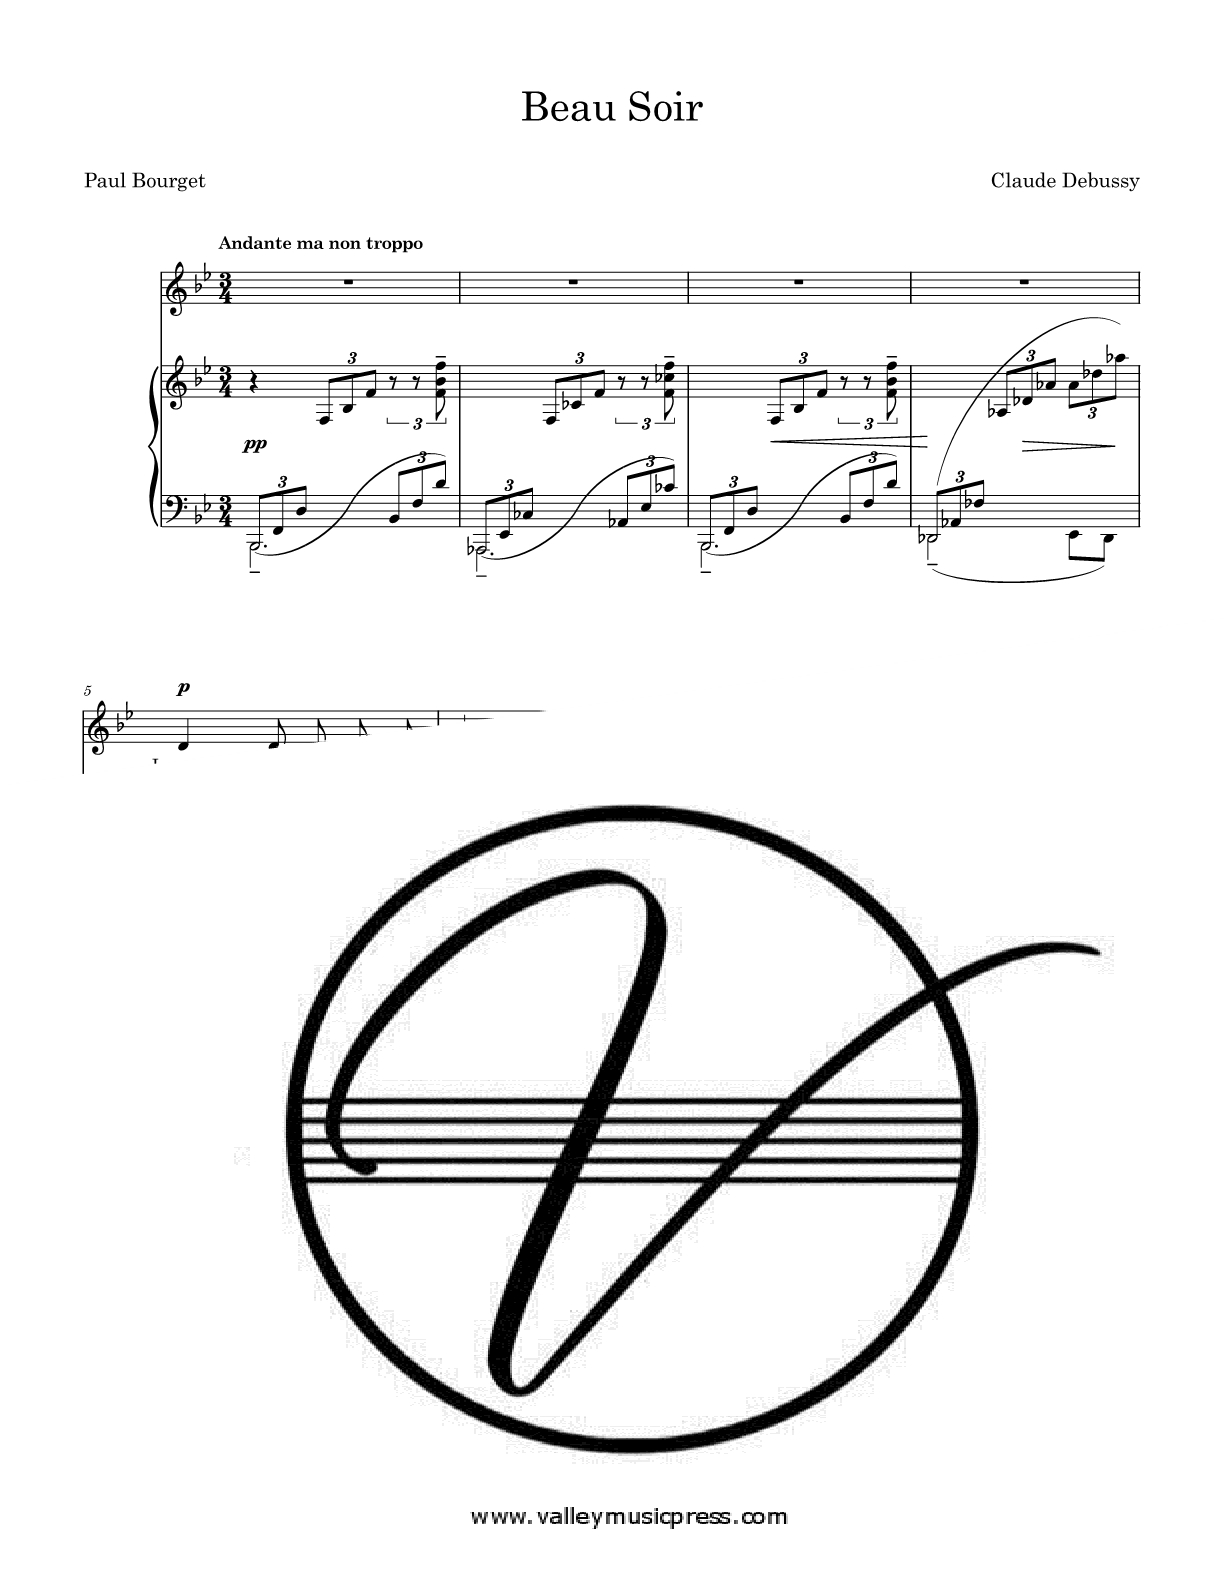 Debussy - Beau soir (Voice) - Click Image to Close